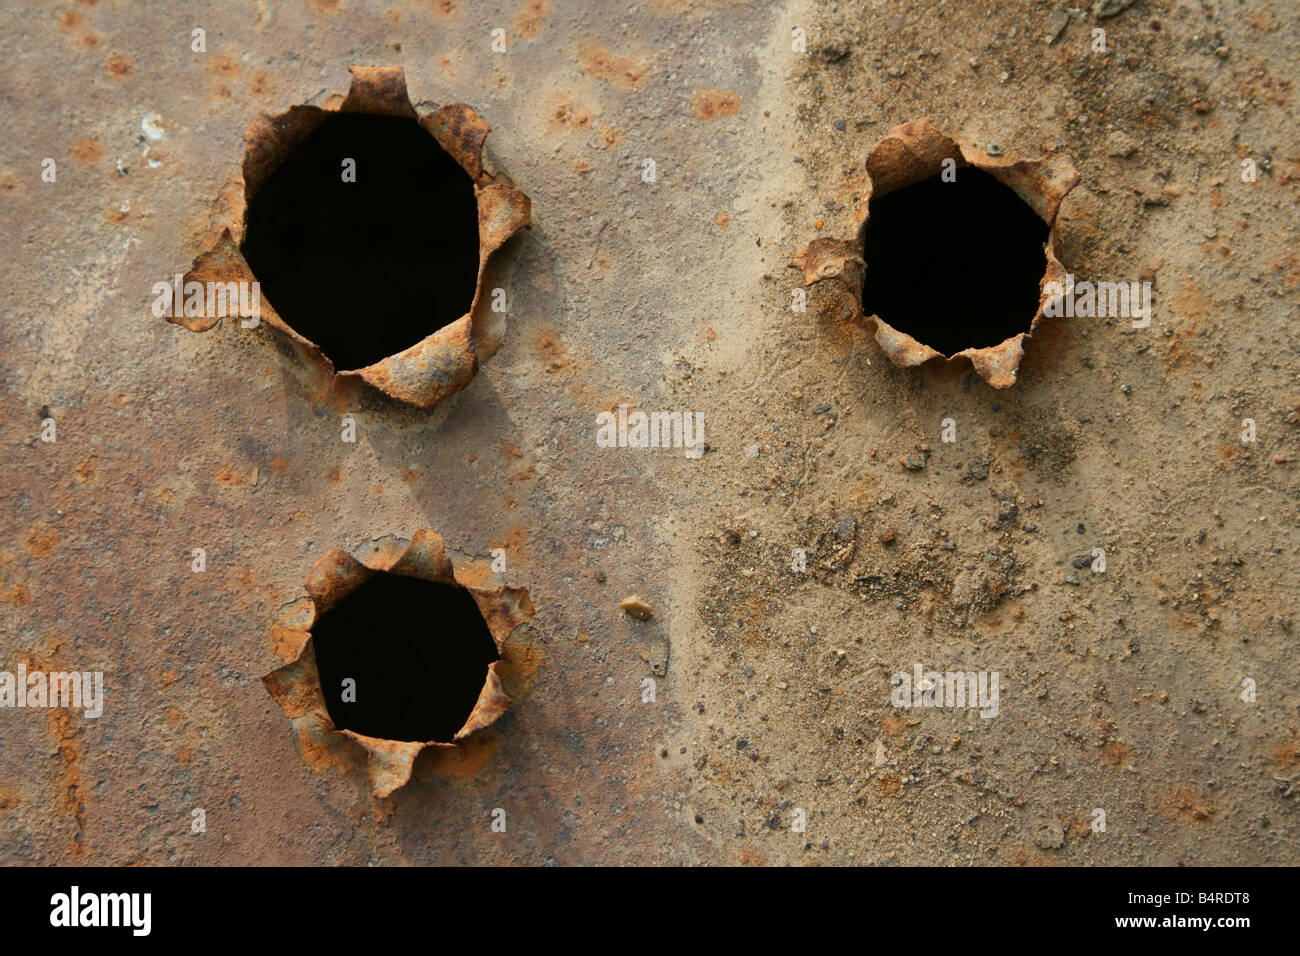 Bullet holes with black center in the iron rusty plate Stock Photo